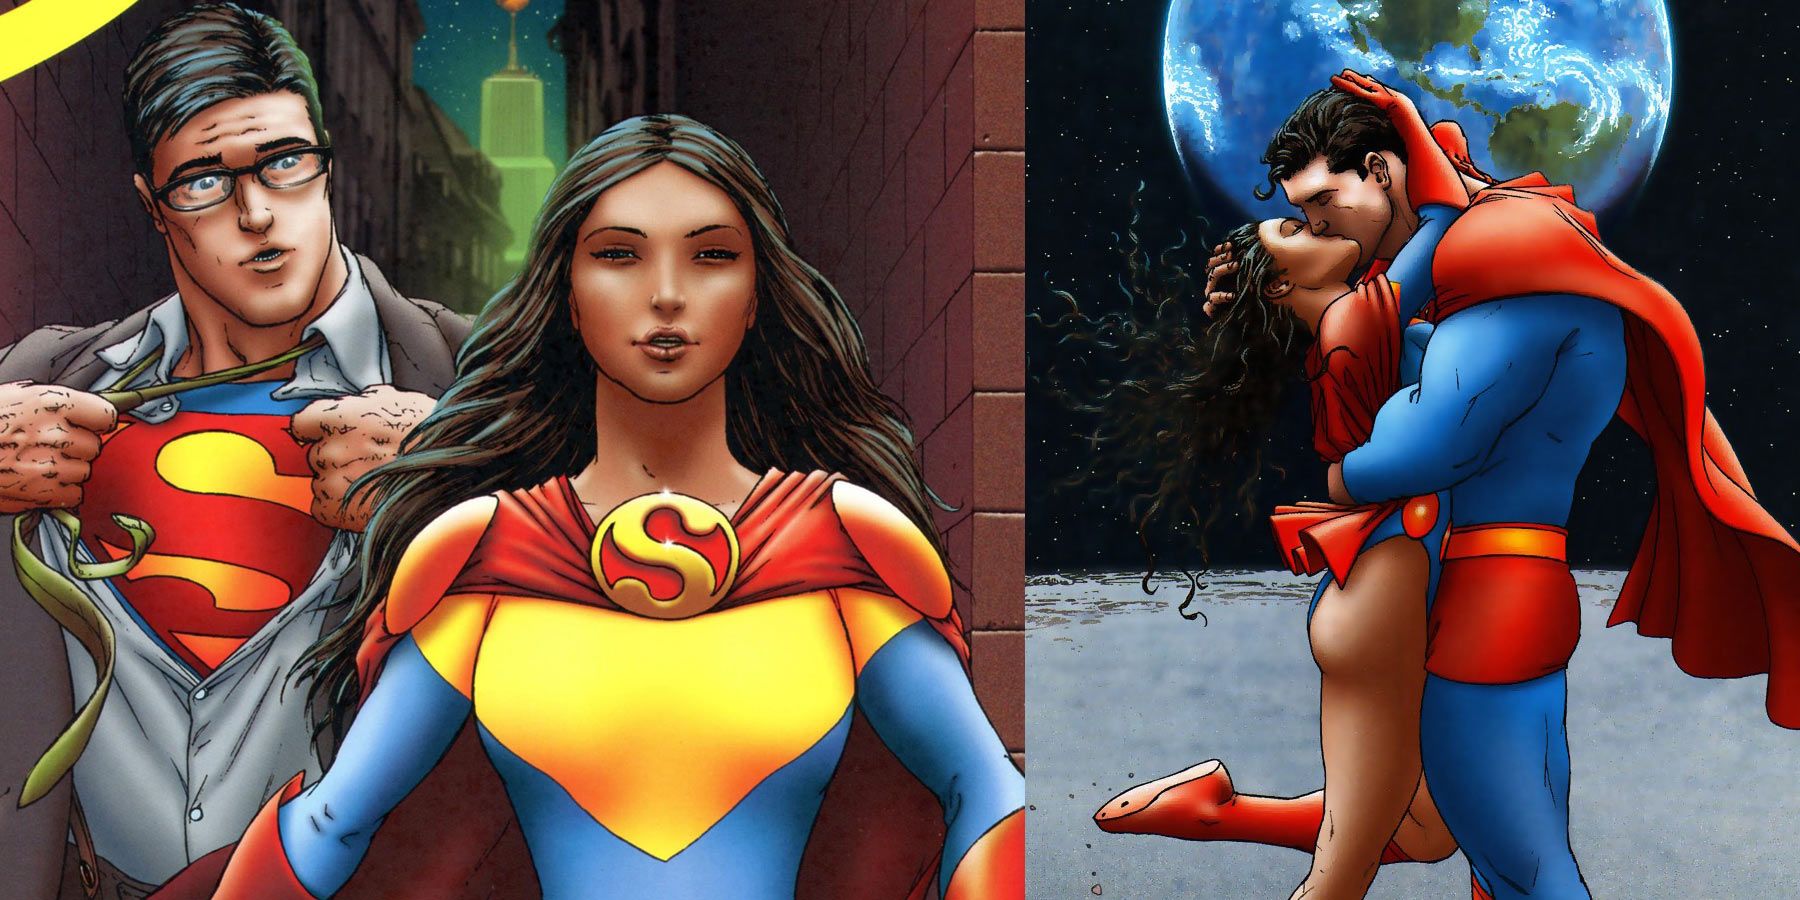 A split image of Lois Lane as Superwoman and of Lois Lane kissing All Star Superman